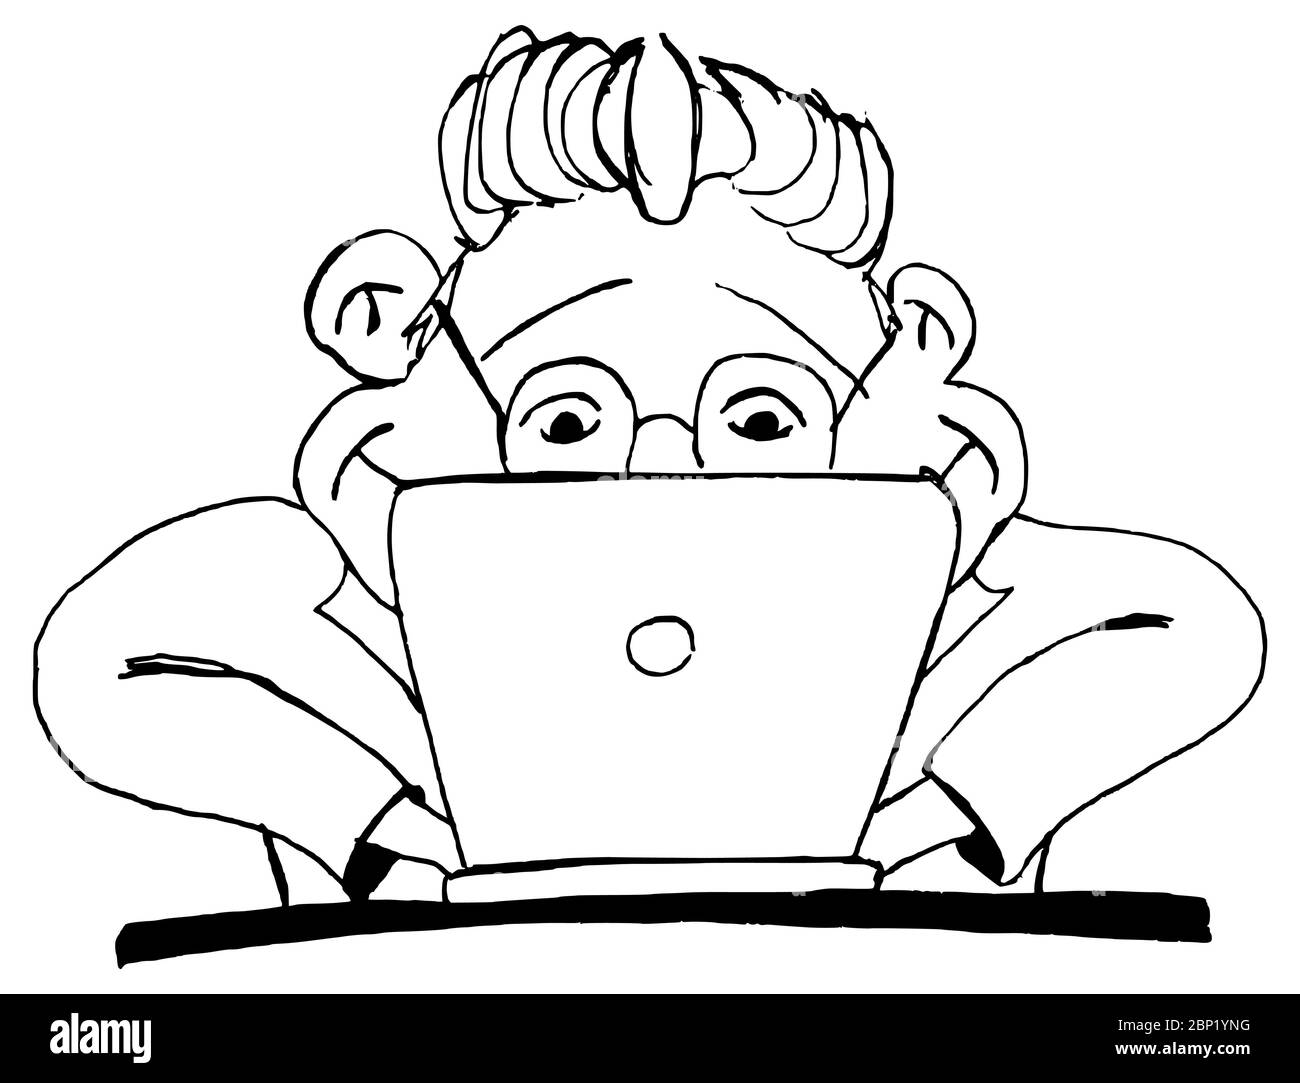 Cartoon character man working at his computer during isolation from Coronavirus COVID-19 outbreak #stayathome Stock Photo